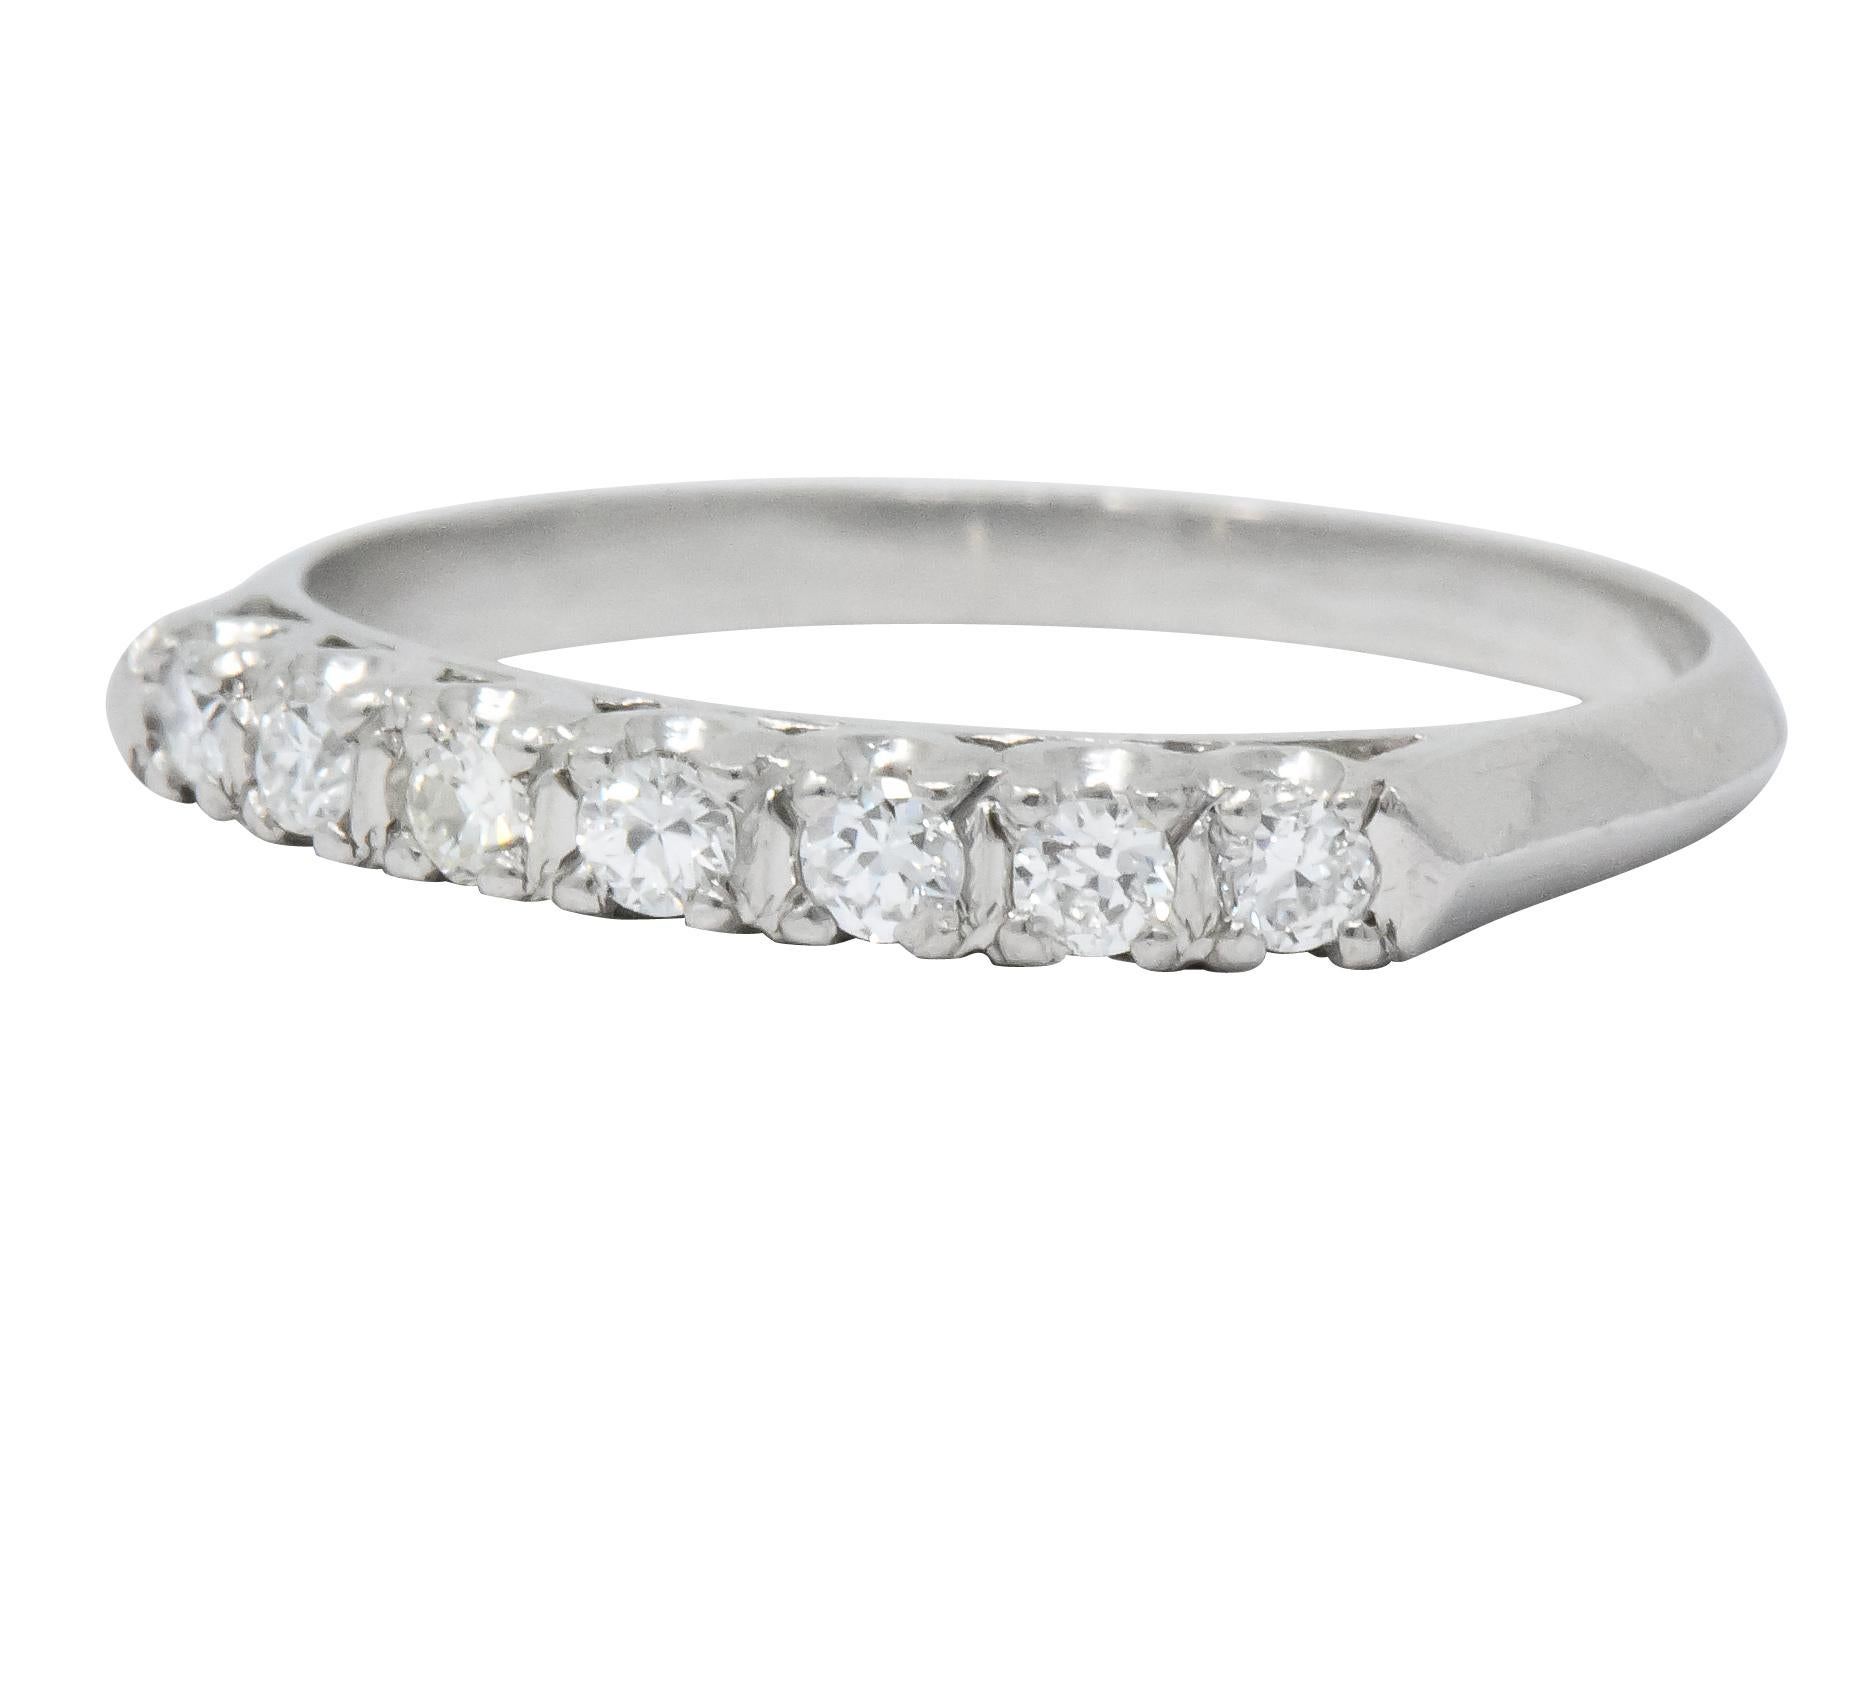 Set to front with seven round brilliant cut diamonds

Weighing approximately 0.21 carat total, eye-clean and white

Prong set with knife-edge shank

Stamped platinum

Great ring to stack

Ring Size: 6 & Sizable

Top Measures: 2.5 mm and sits 2.75 mm